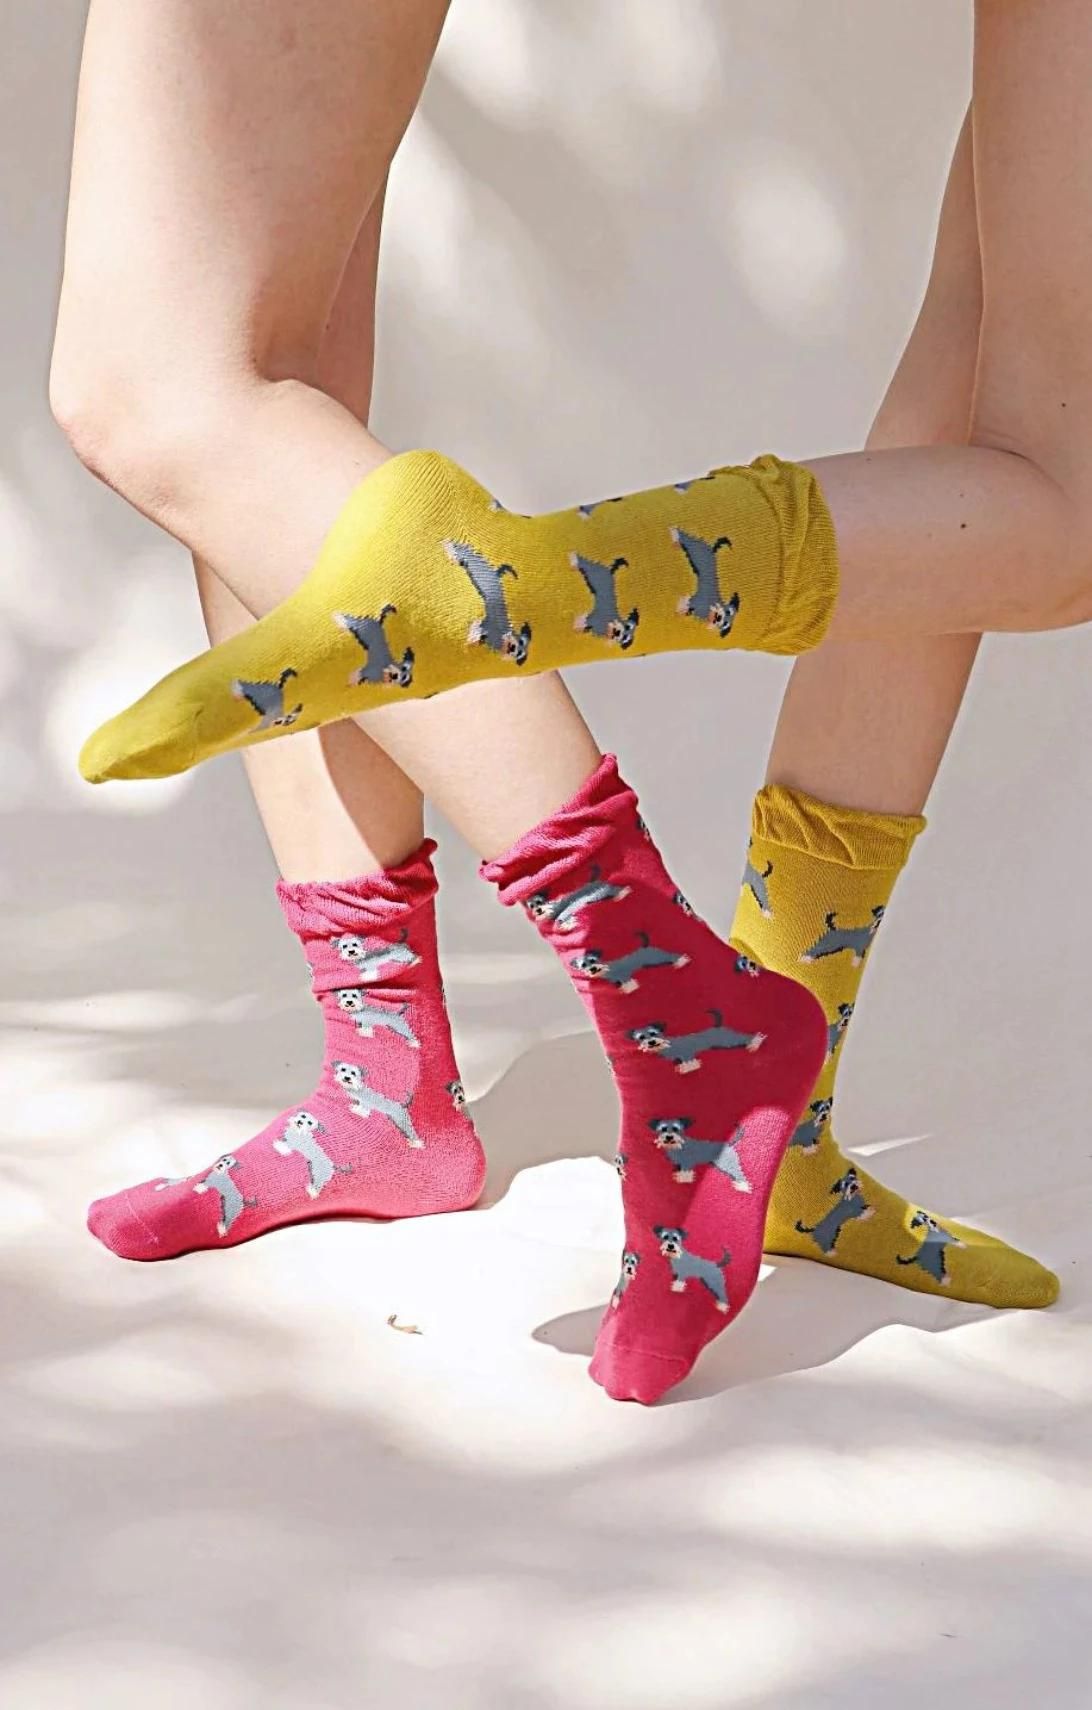 Female leg wearing TABBISOCKS brand Animal Rescue Pairs Schnauzer Socks in CERISE PINK and BITTER YELLOW colors, respectively